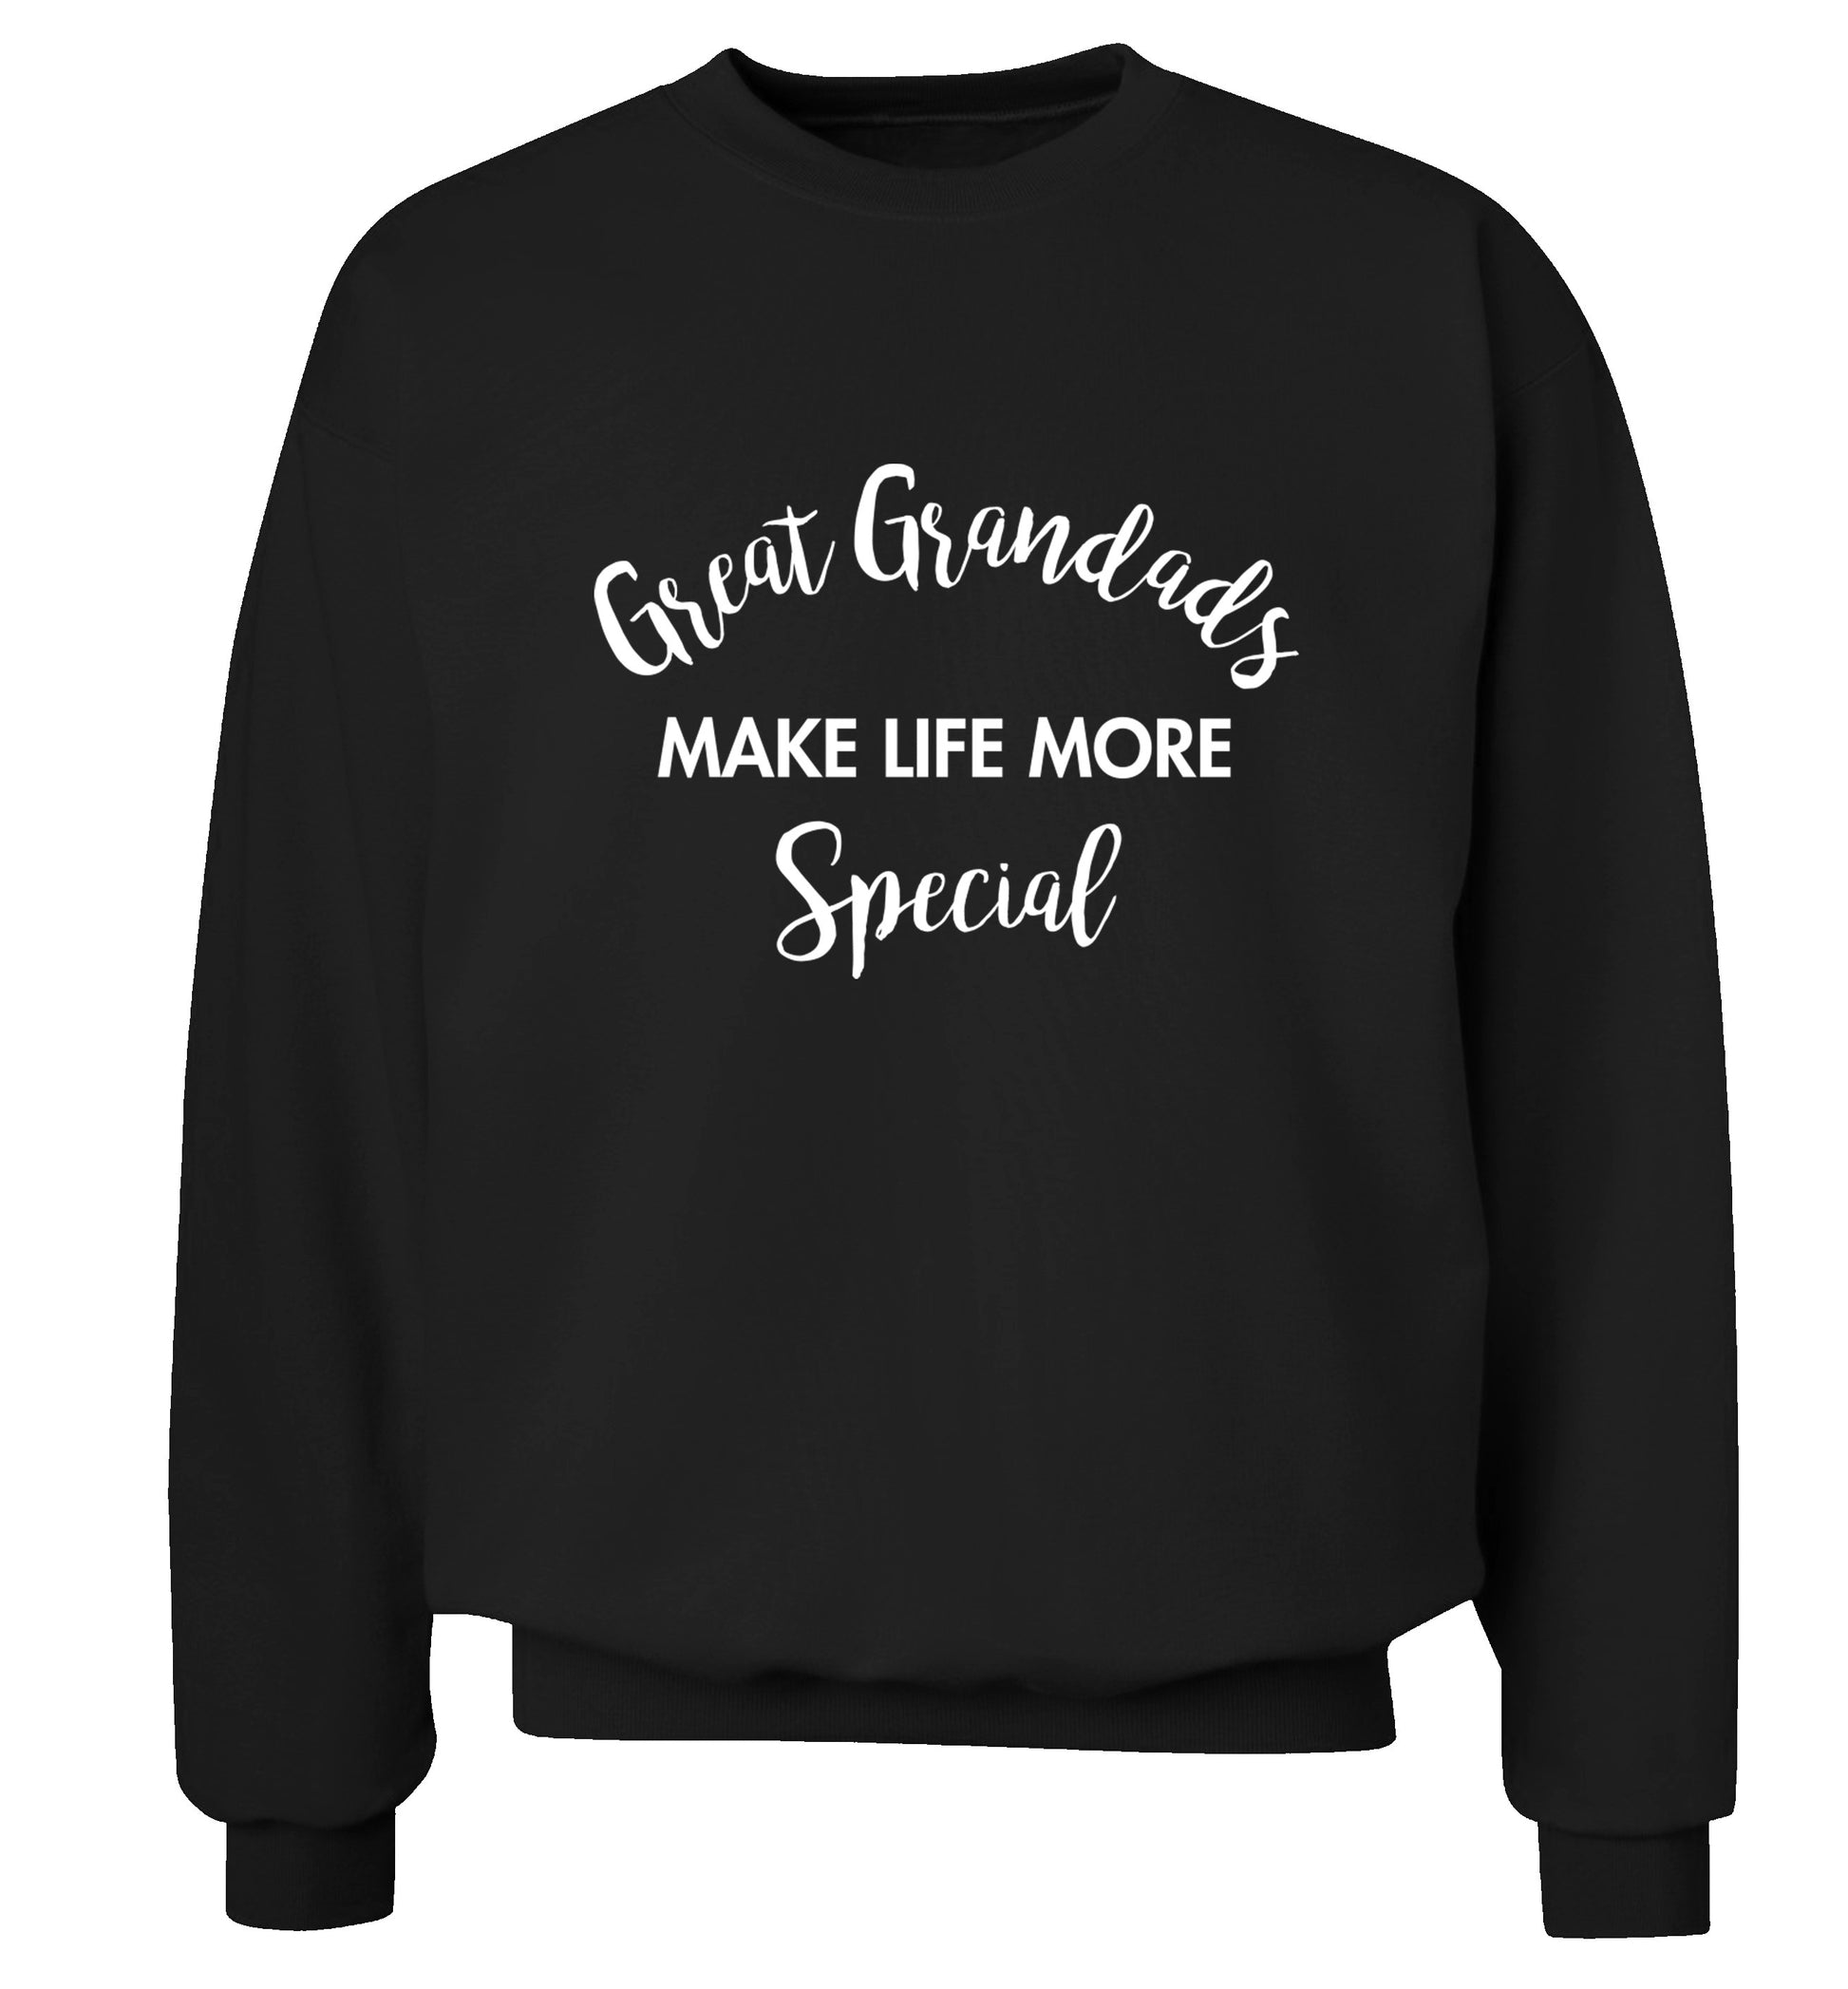 Great Grandads make life more special Adult's unisex black Sweater 2XL